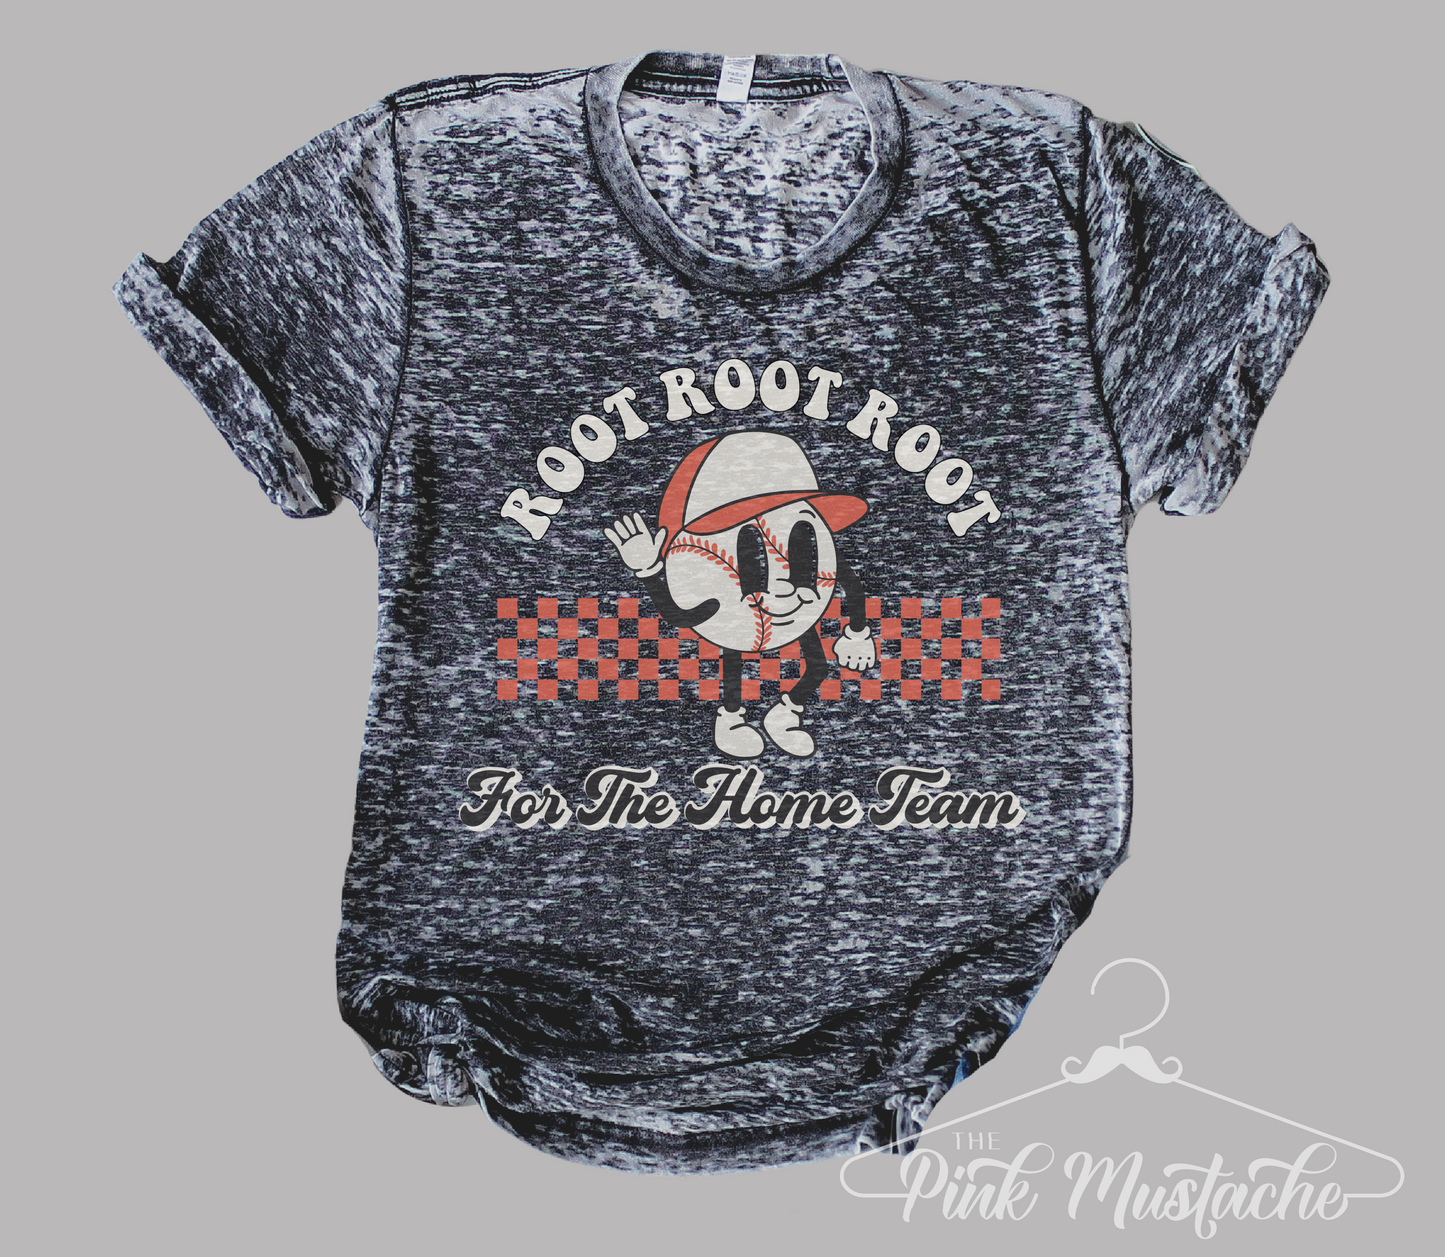 Acid Washed Baseball Root Root Root for the Home Team Tee/ Super Cute Dyed Tees - Unisex Sized/ Baseball Life